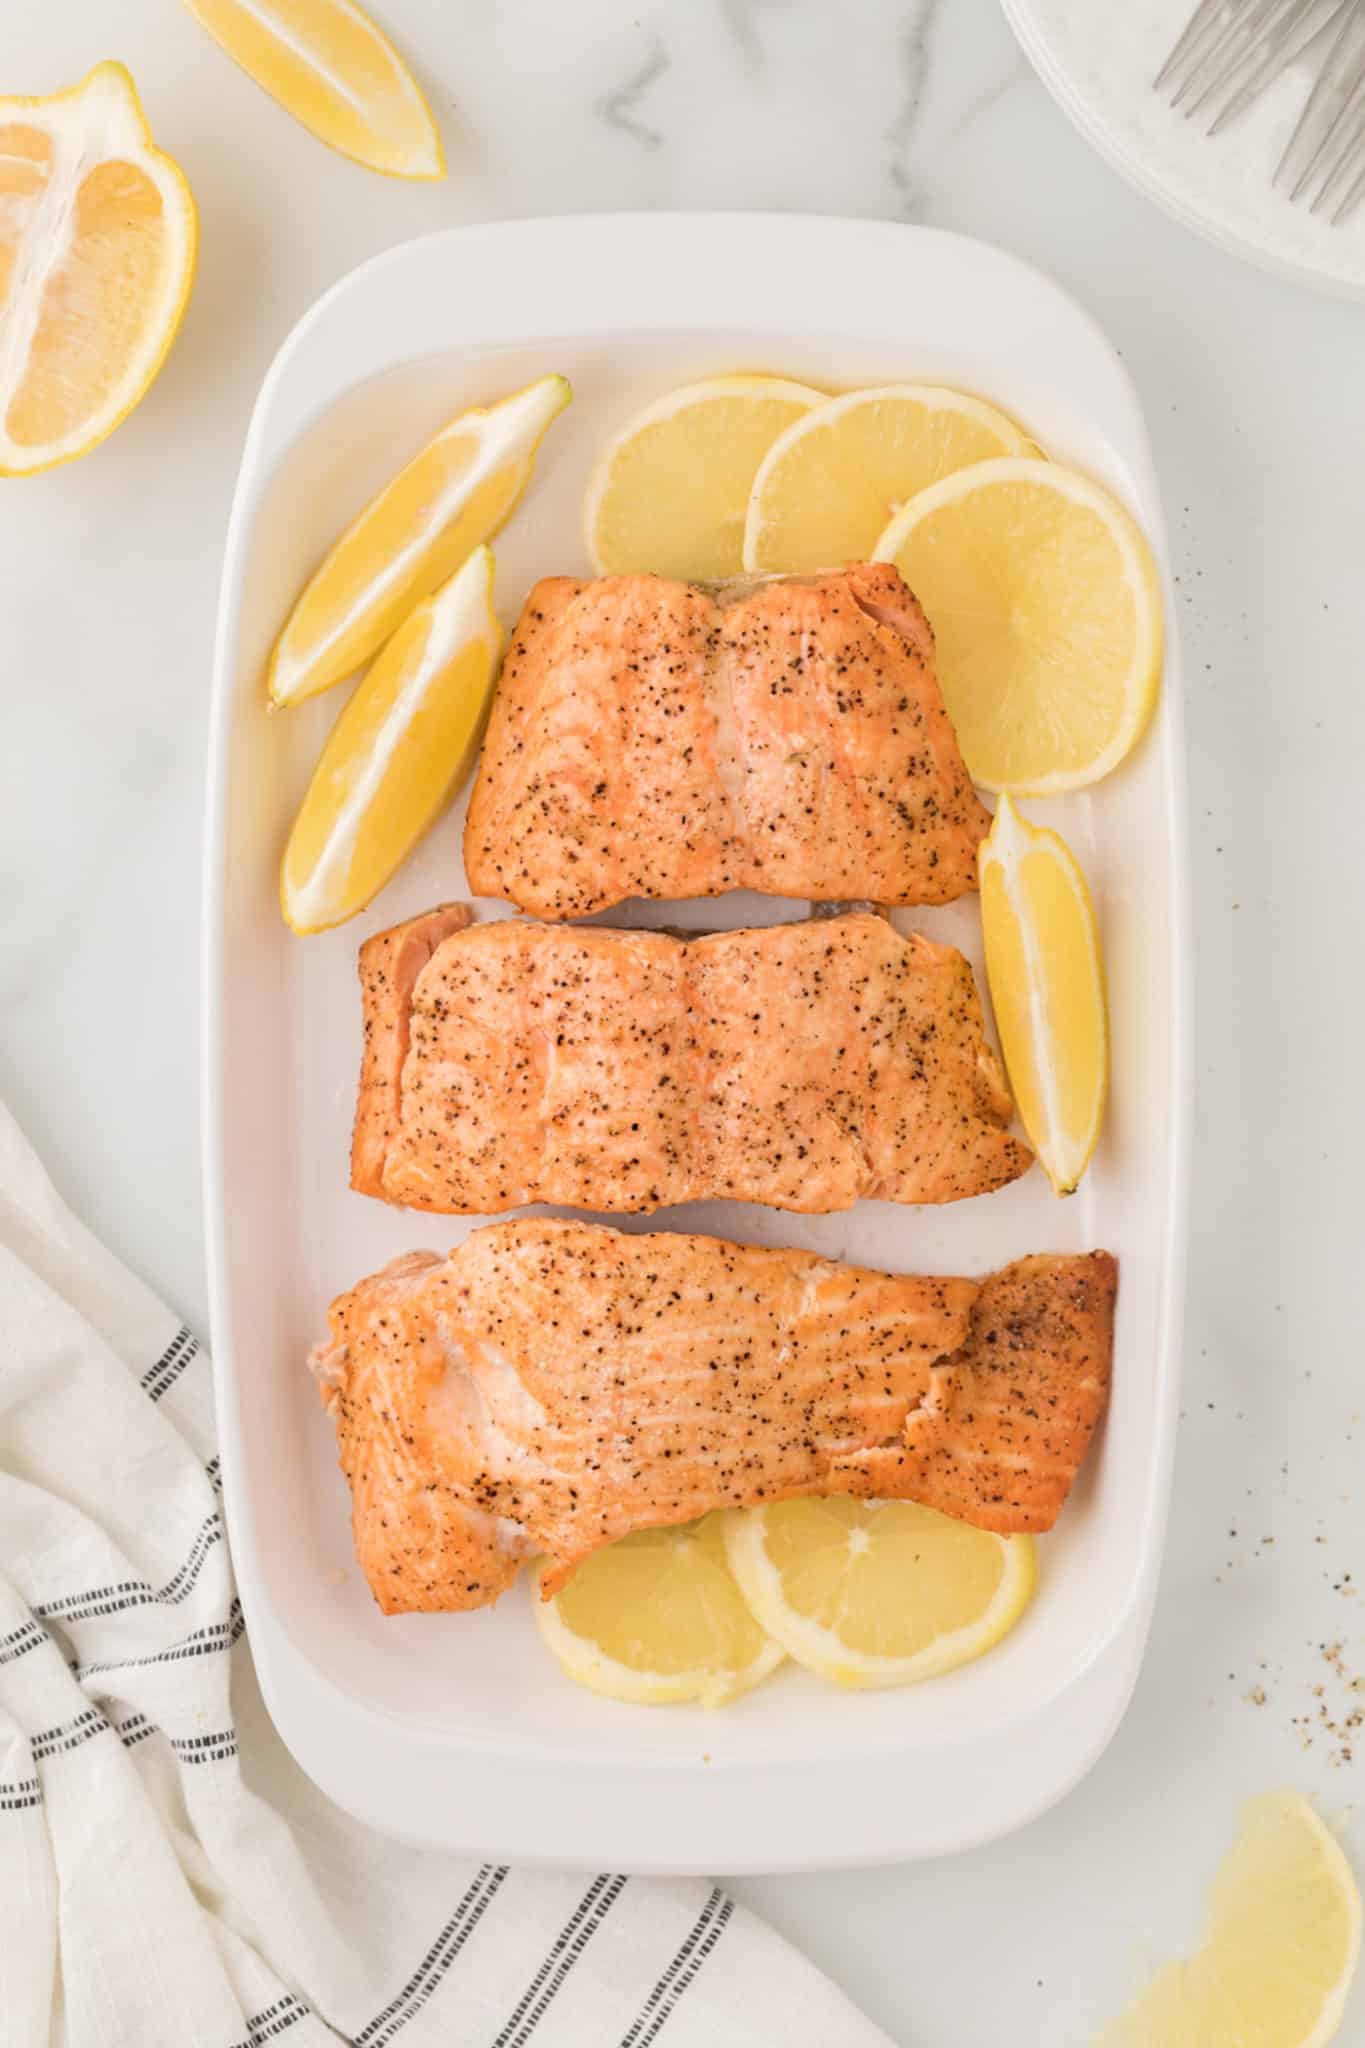 cooked salmon fillets on a serving dish with lemon slices.